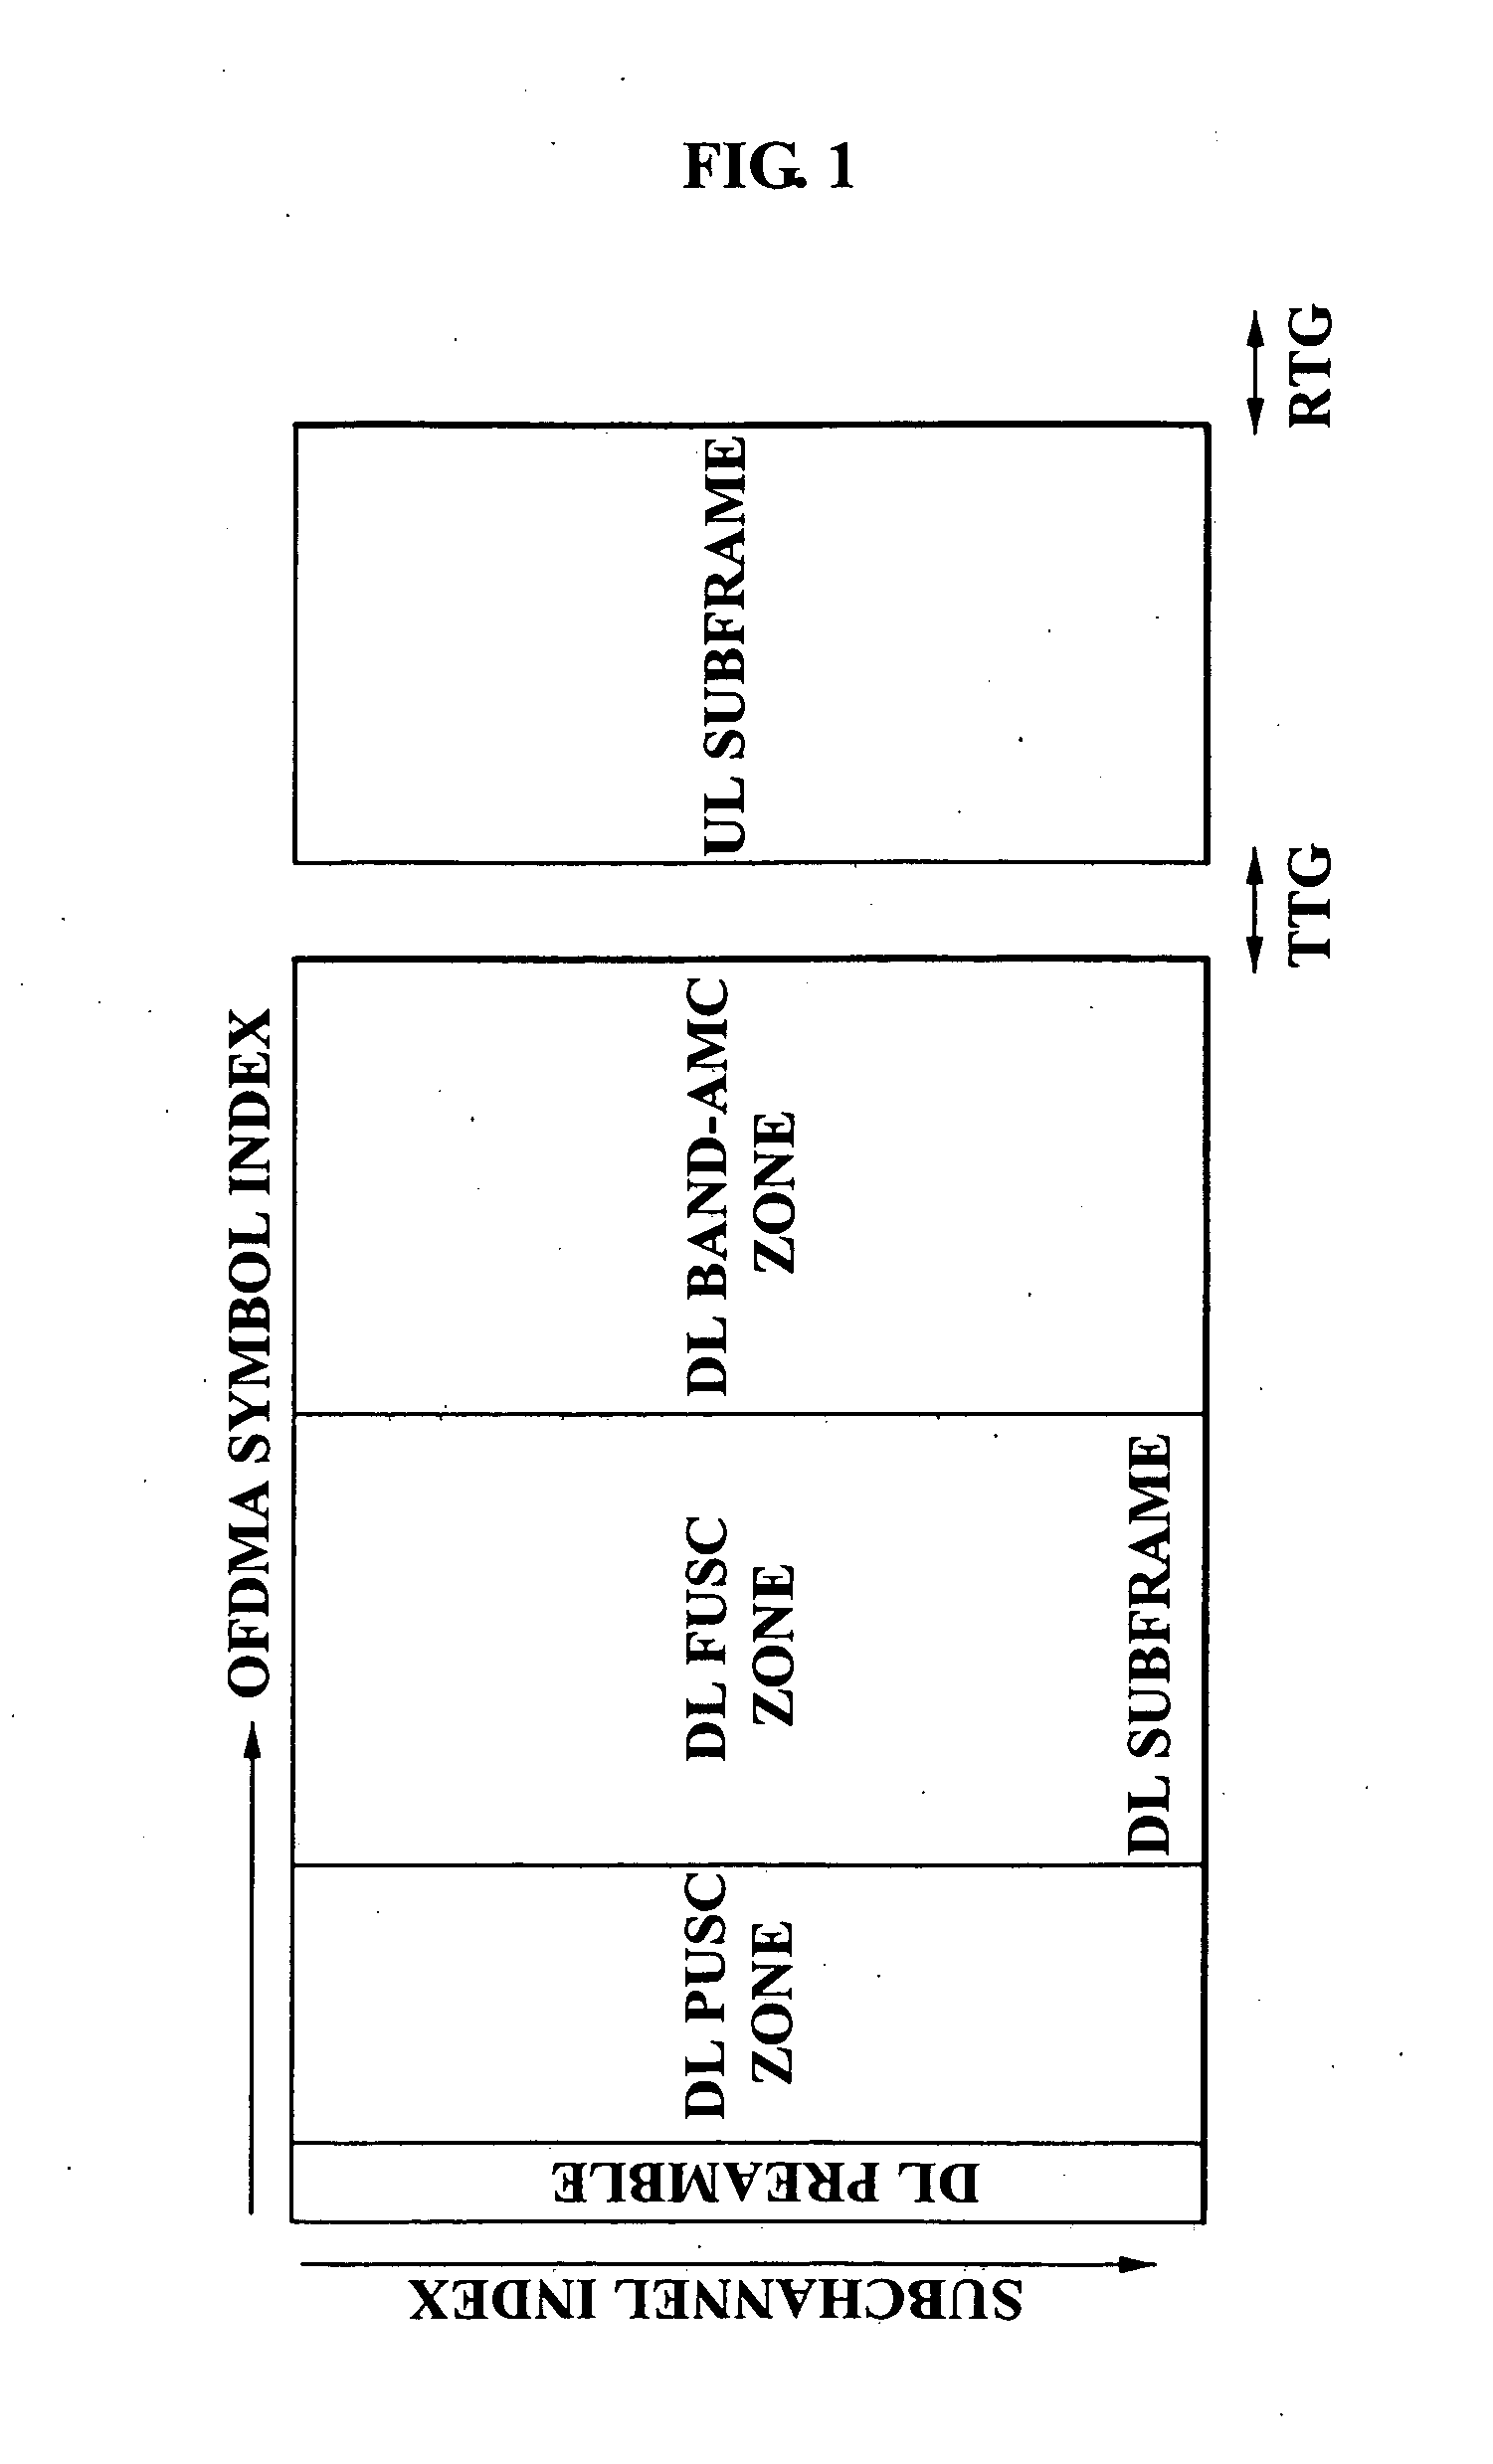 Method and apparatus for searching cells utilizing down link preamble signal